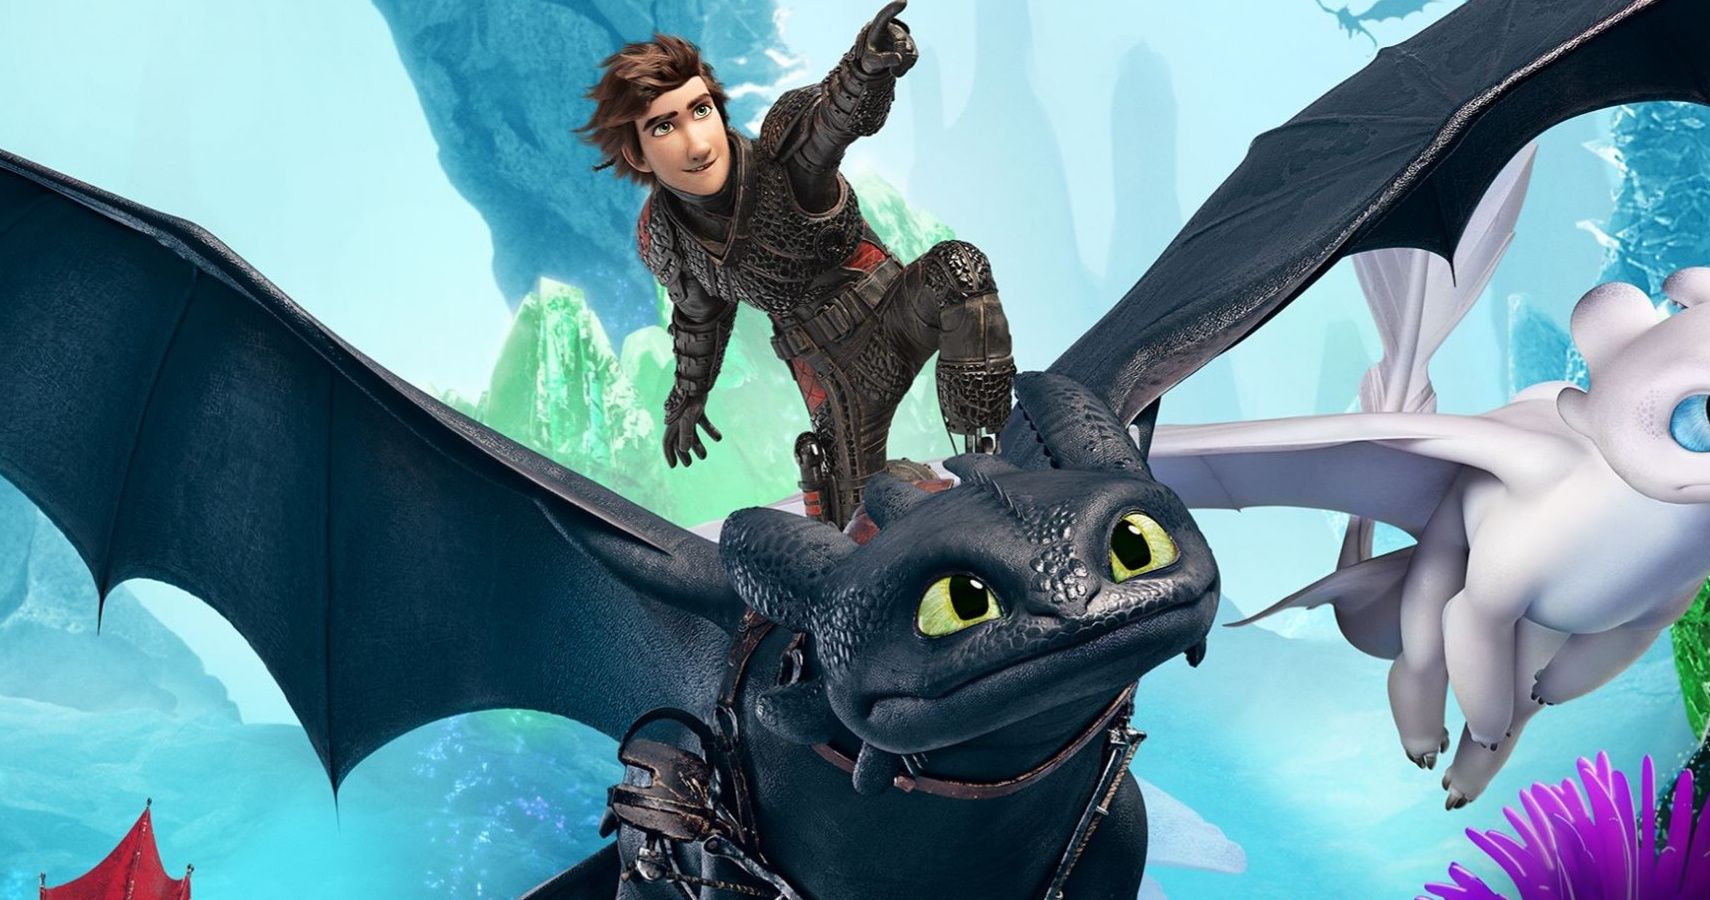 How To Train Your Dragon elementary school